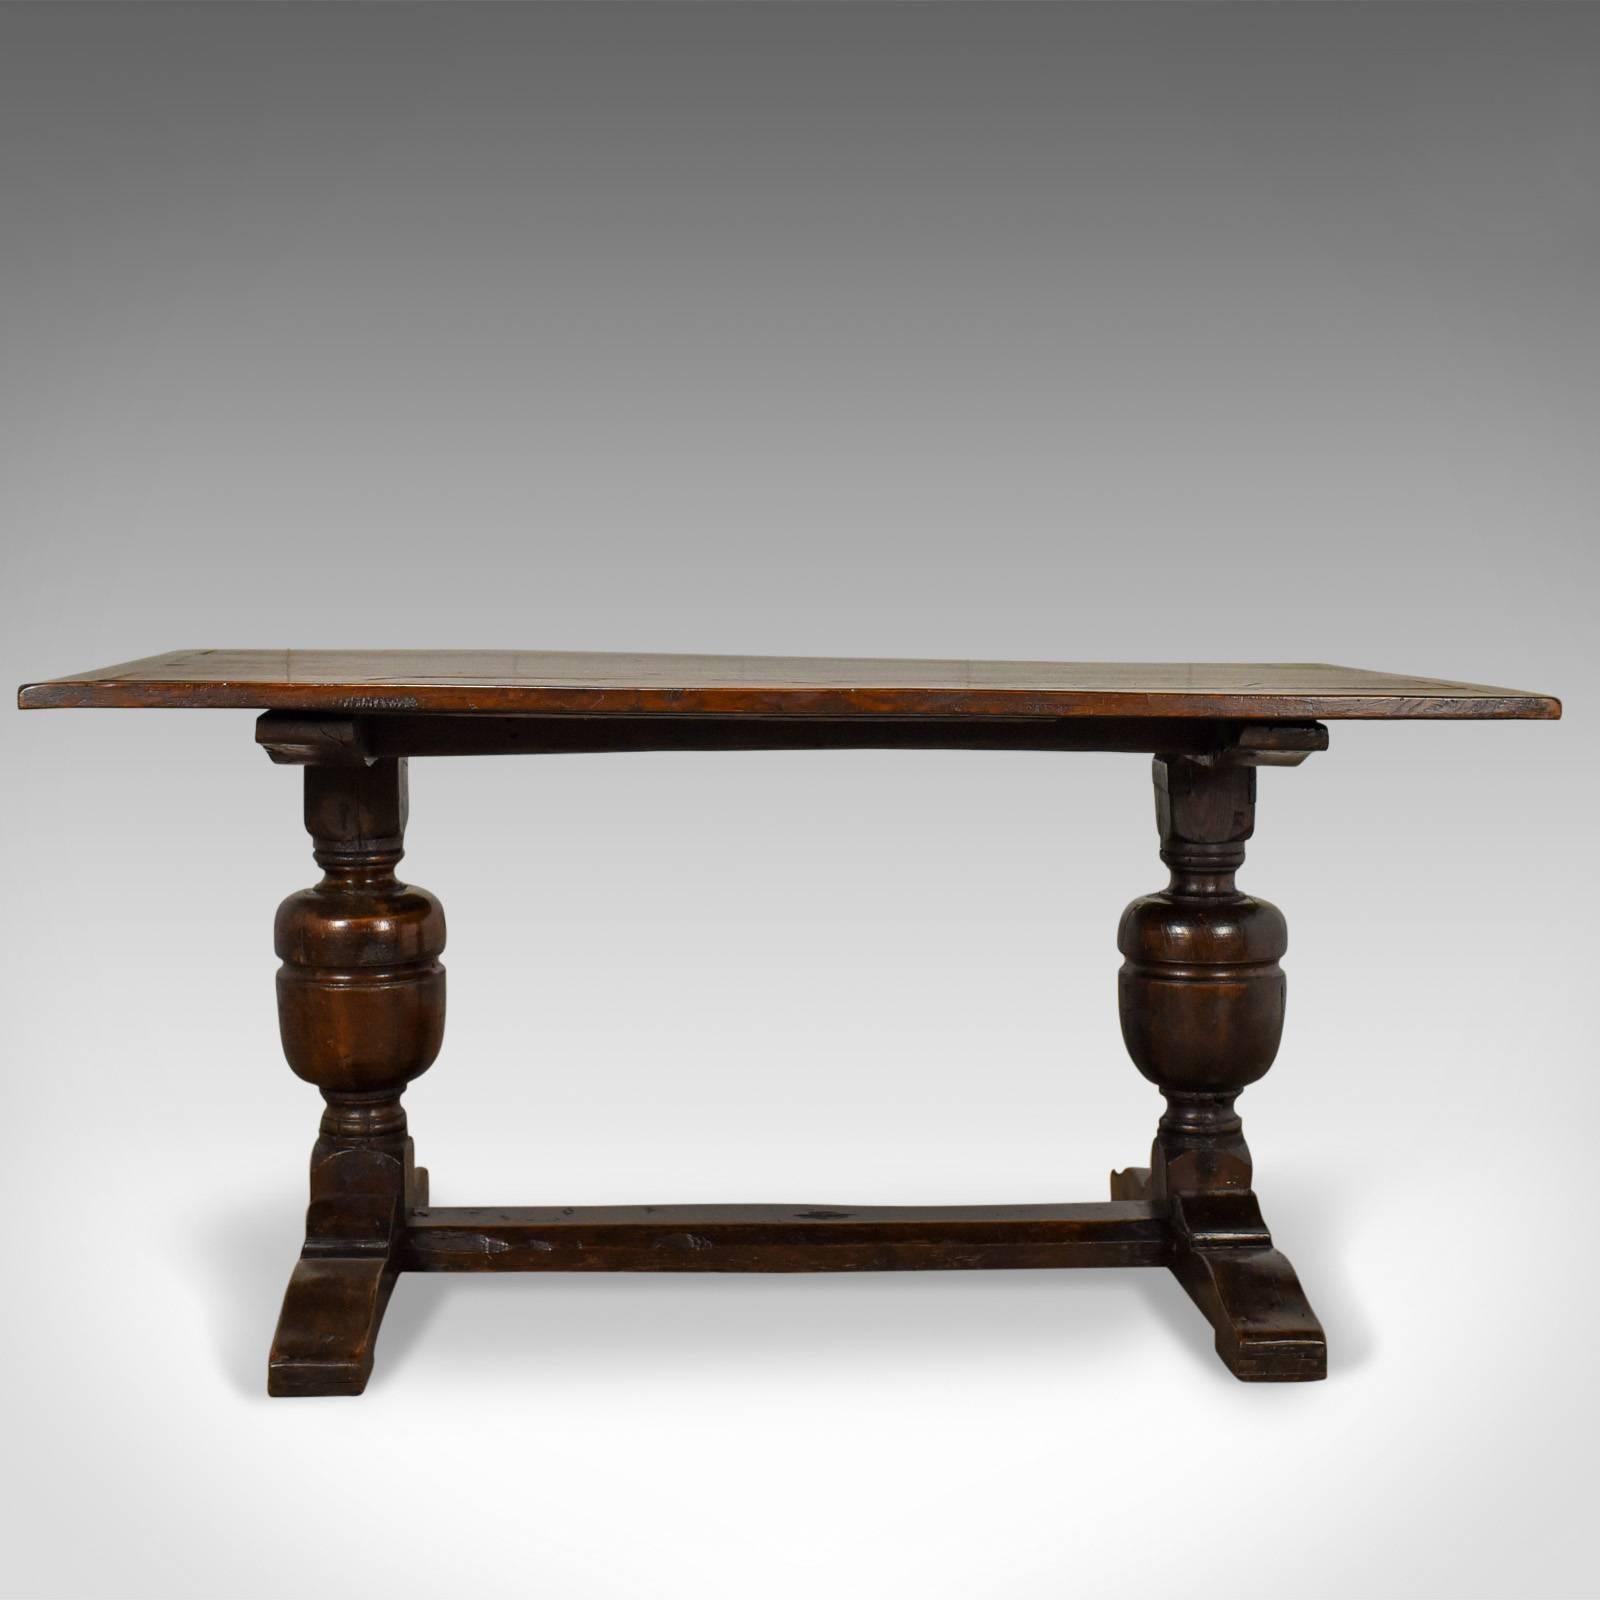 This is a Victorian refectory table in the 17th century taste, an antique, English oak dining table dating to circa 1880.

Warm, dark and rich color to the English oak
Grain interest throughout and a desirable aged patina
Comfortable four to